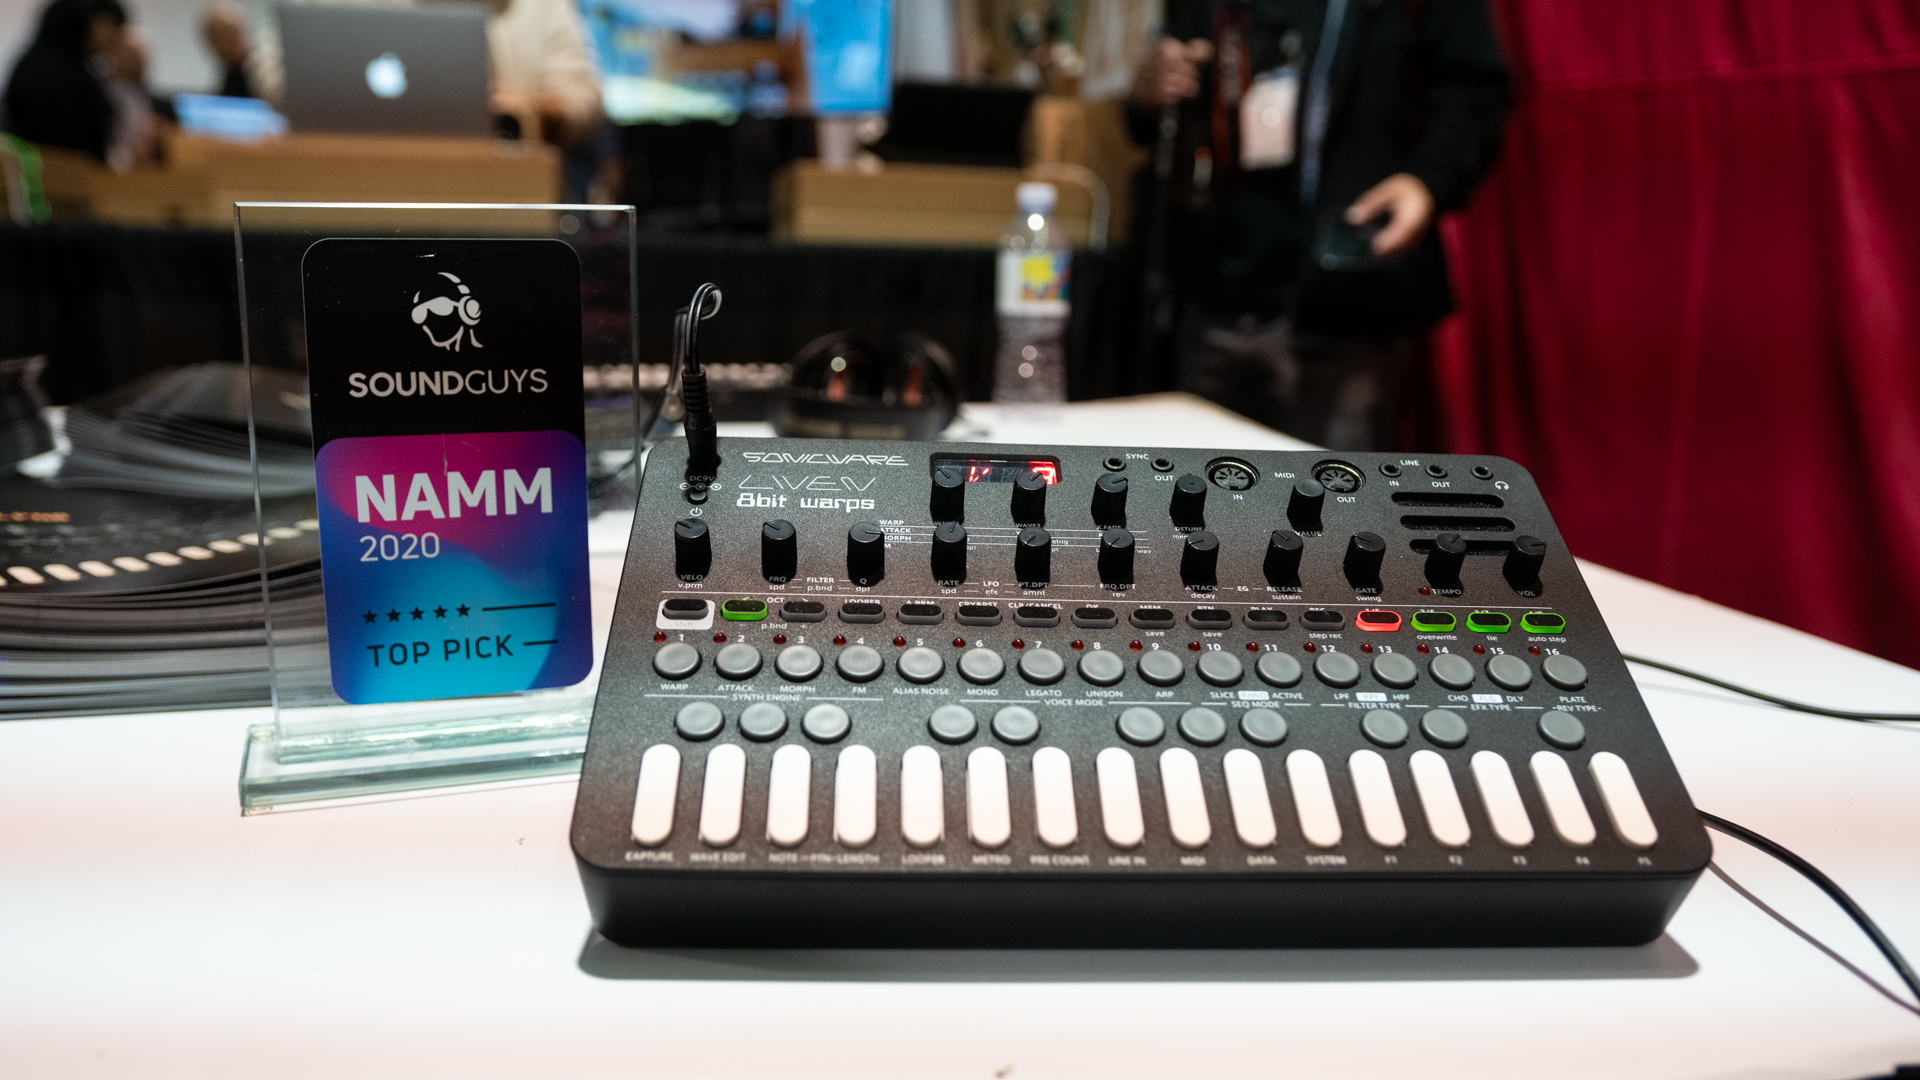 The Sonicware Liven 8bit warps synth pictured next to the SoundGuys award on a table at NAMM 2020. 